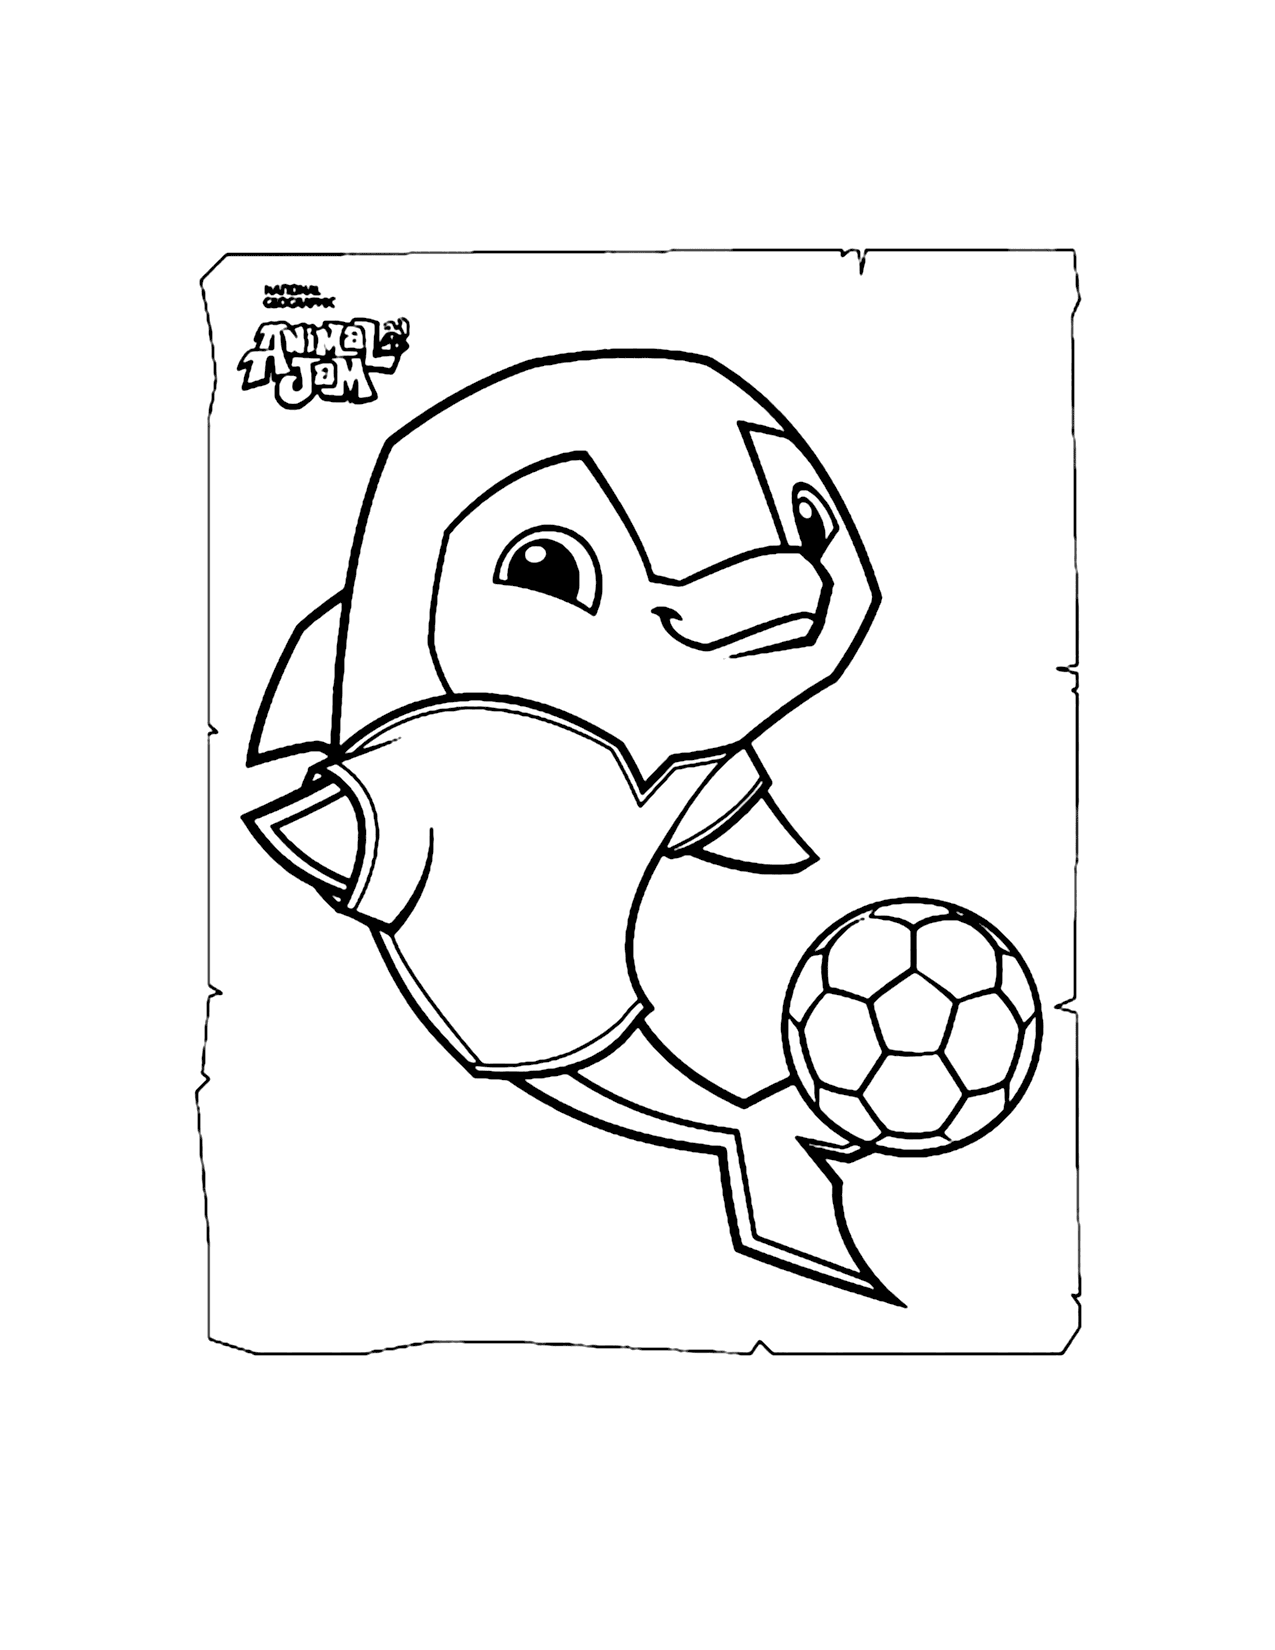 Soccer Dolphin Animal Jam Coloring Page